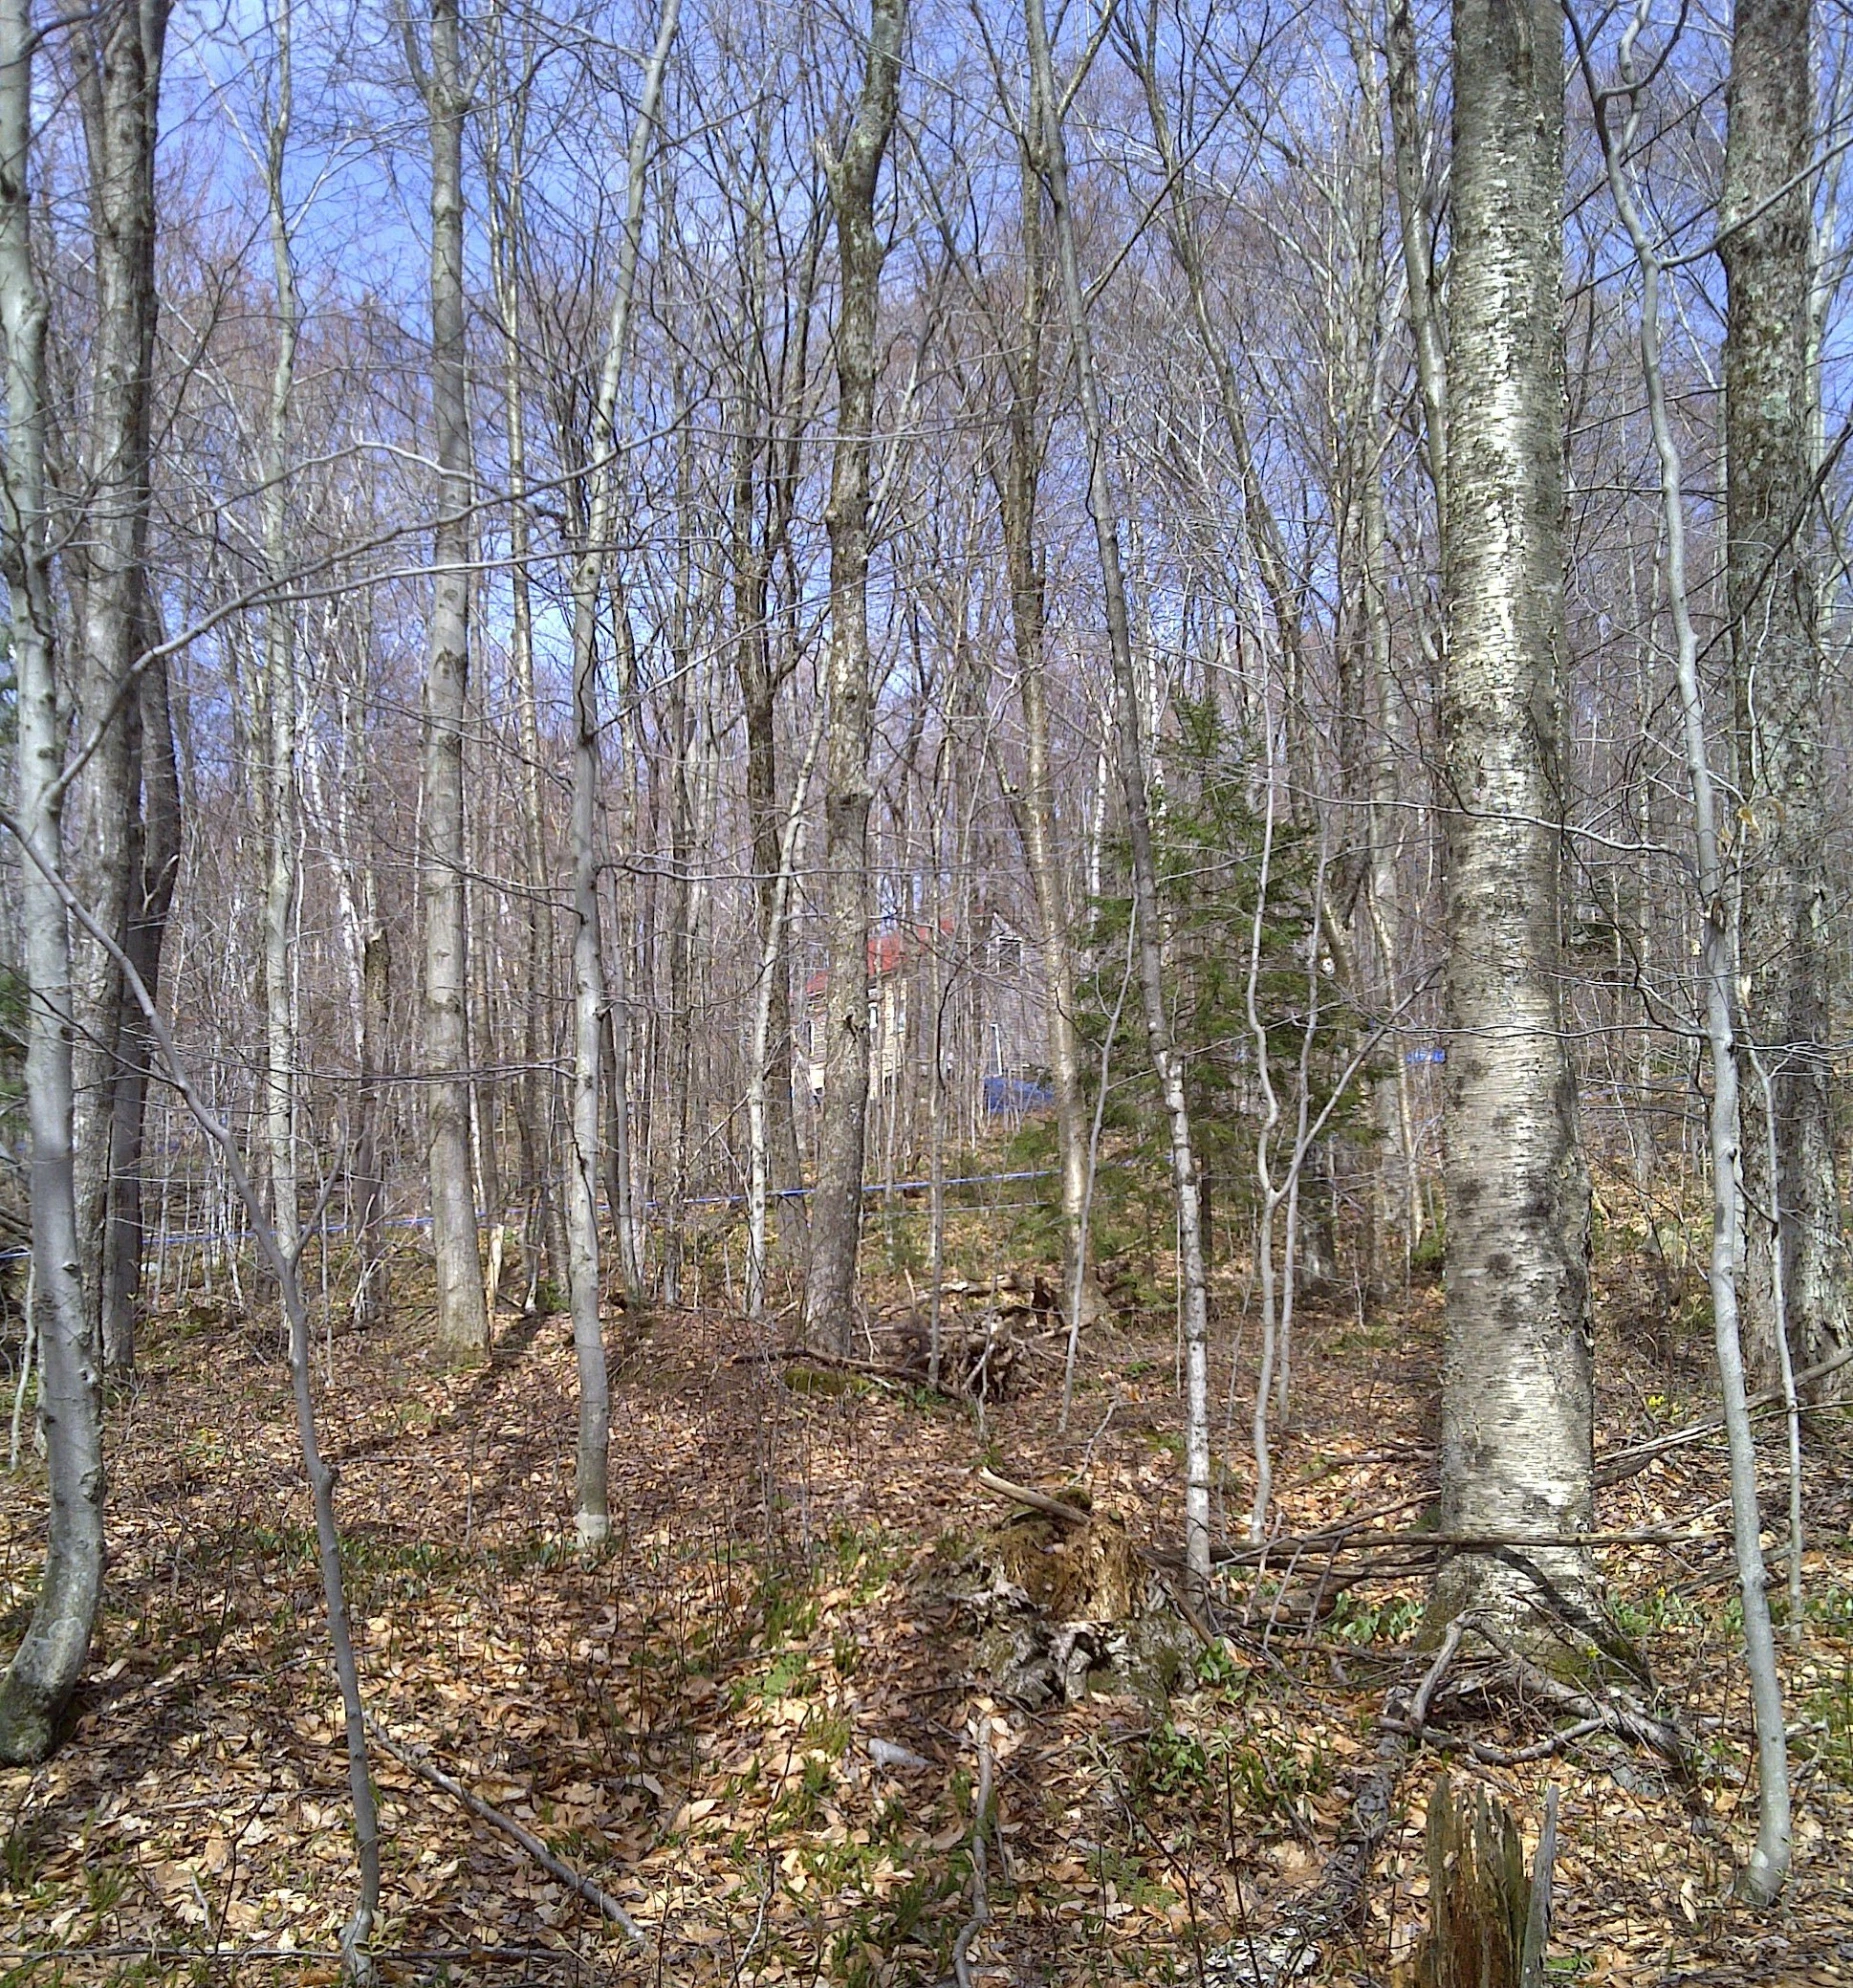 this is a wooded area that has several large trees in it